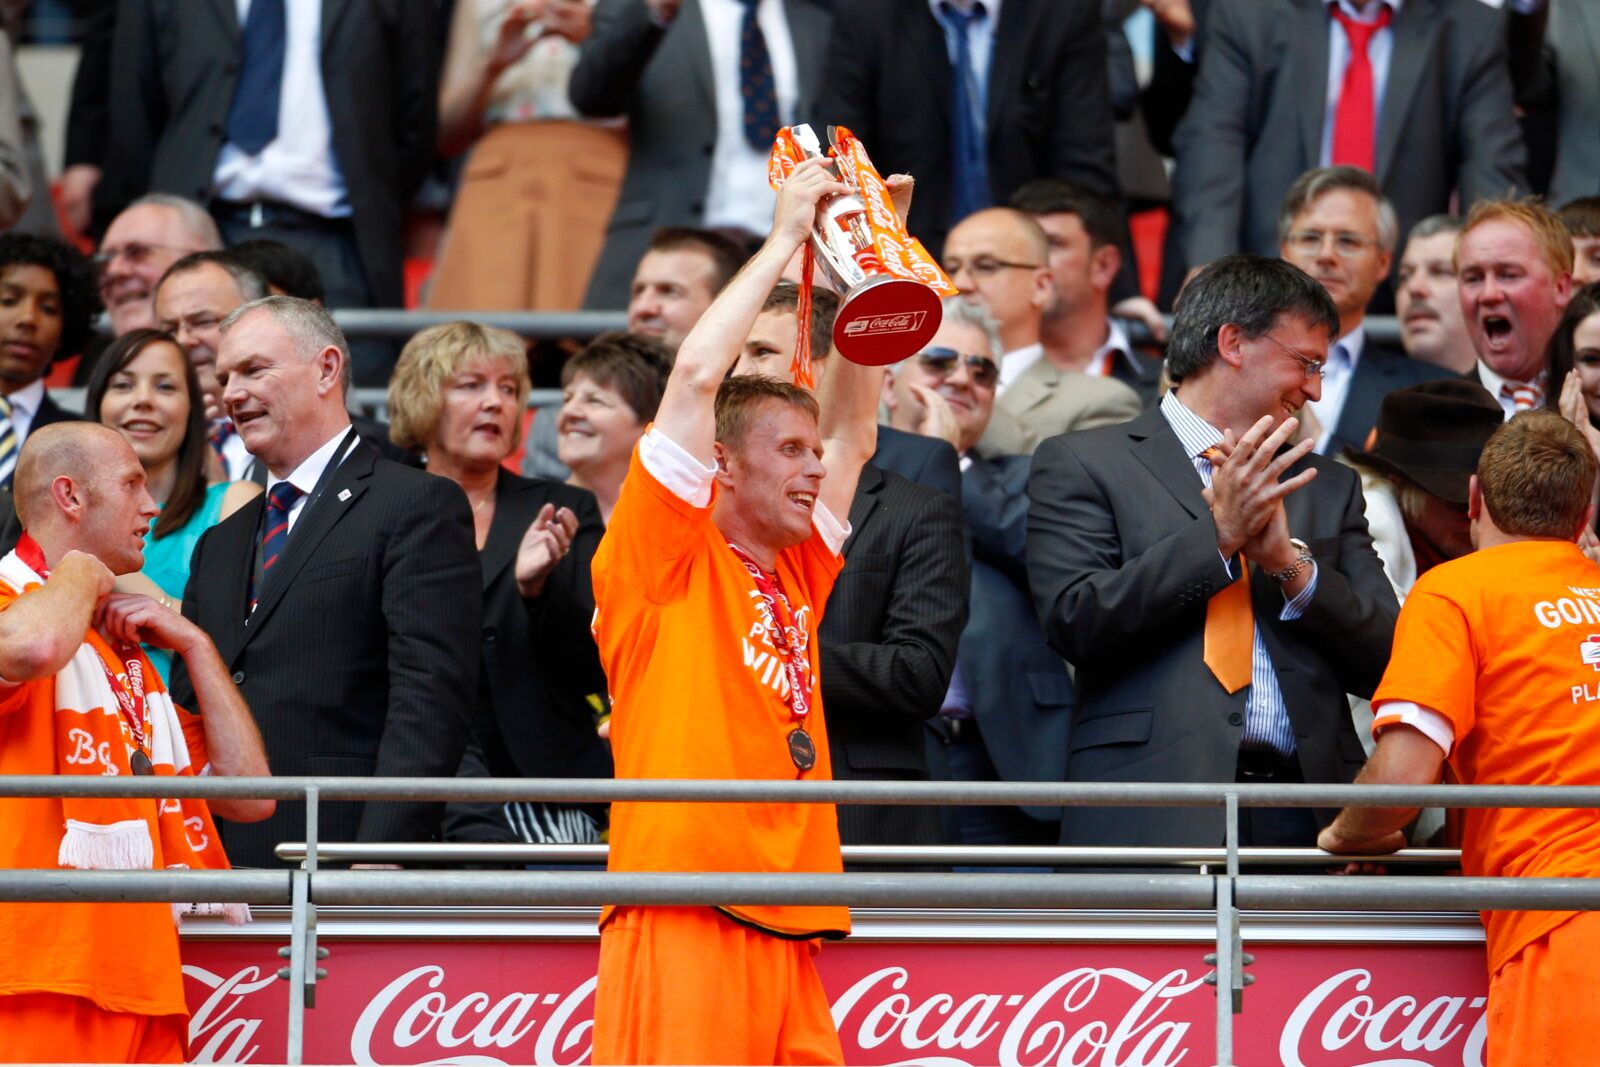 Football - Blackpool v Cardiff City - Coca-Cola Football League Championship Play Off Final - Wembley Stadium - 09/10 - 22/5/10 
Brett Ormerod - Blackpool celebrates victory and gaining promotion with trophy 
Mandatory Credit: Action Images / John Sibley